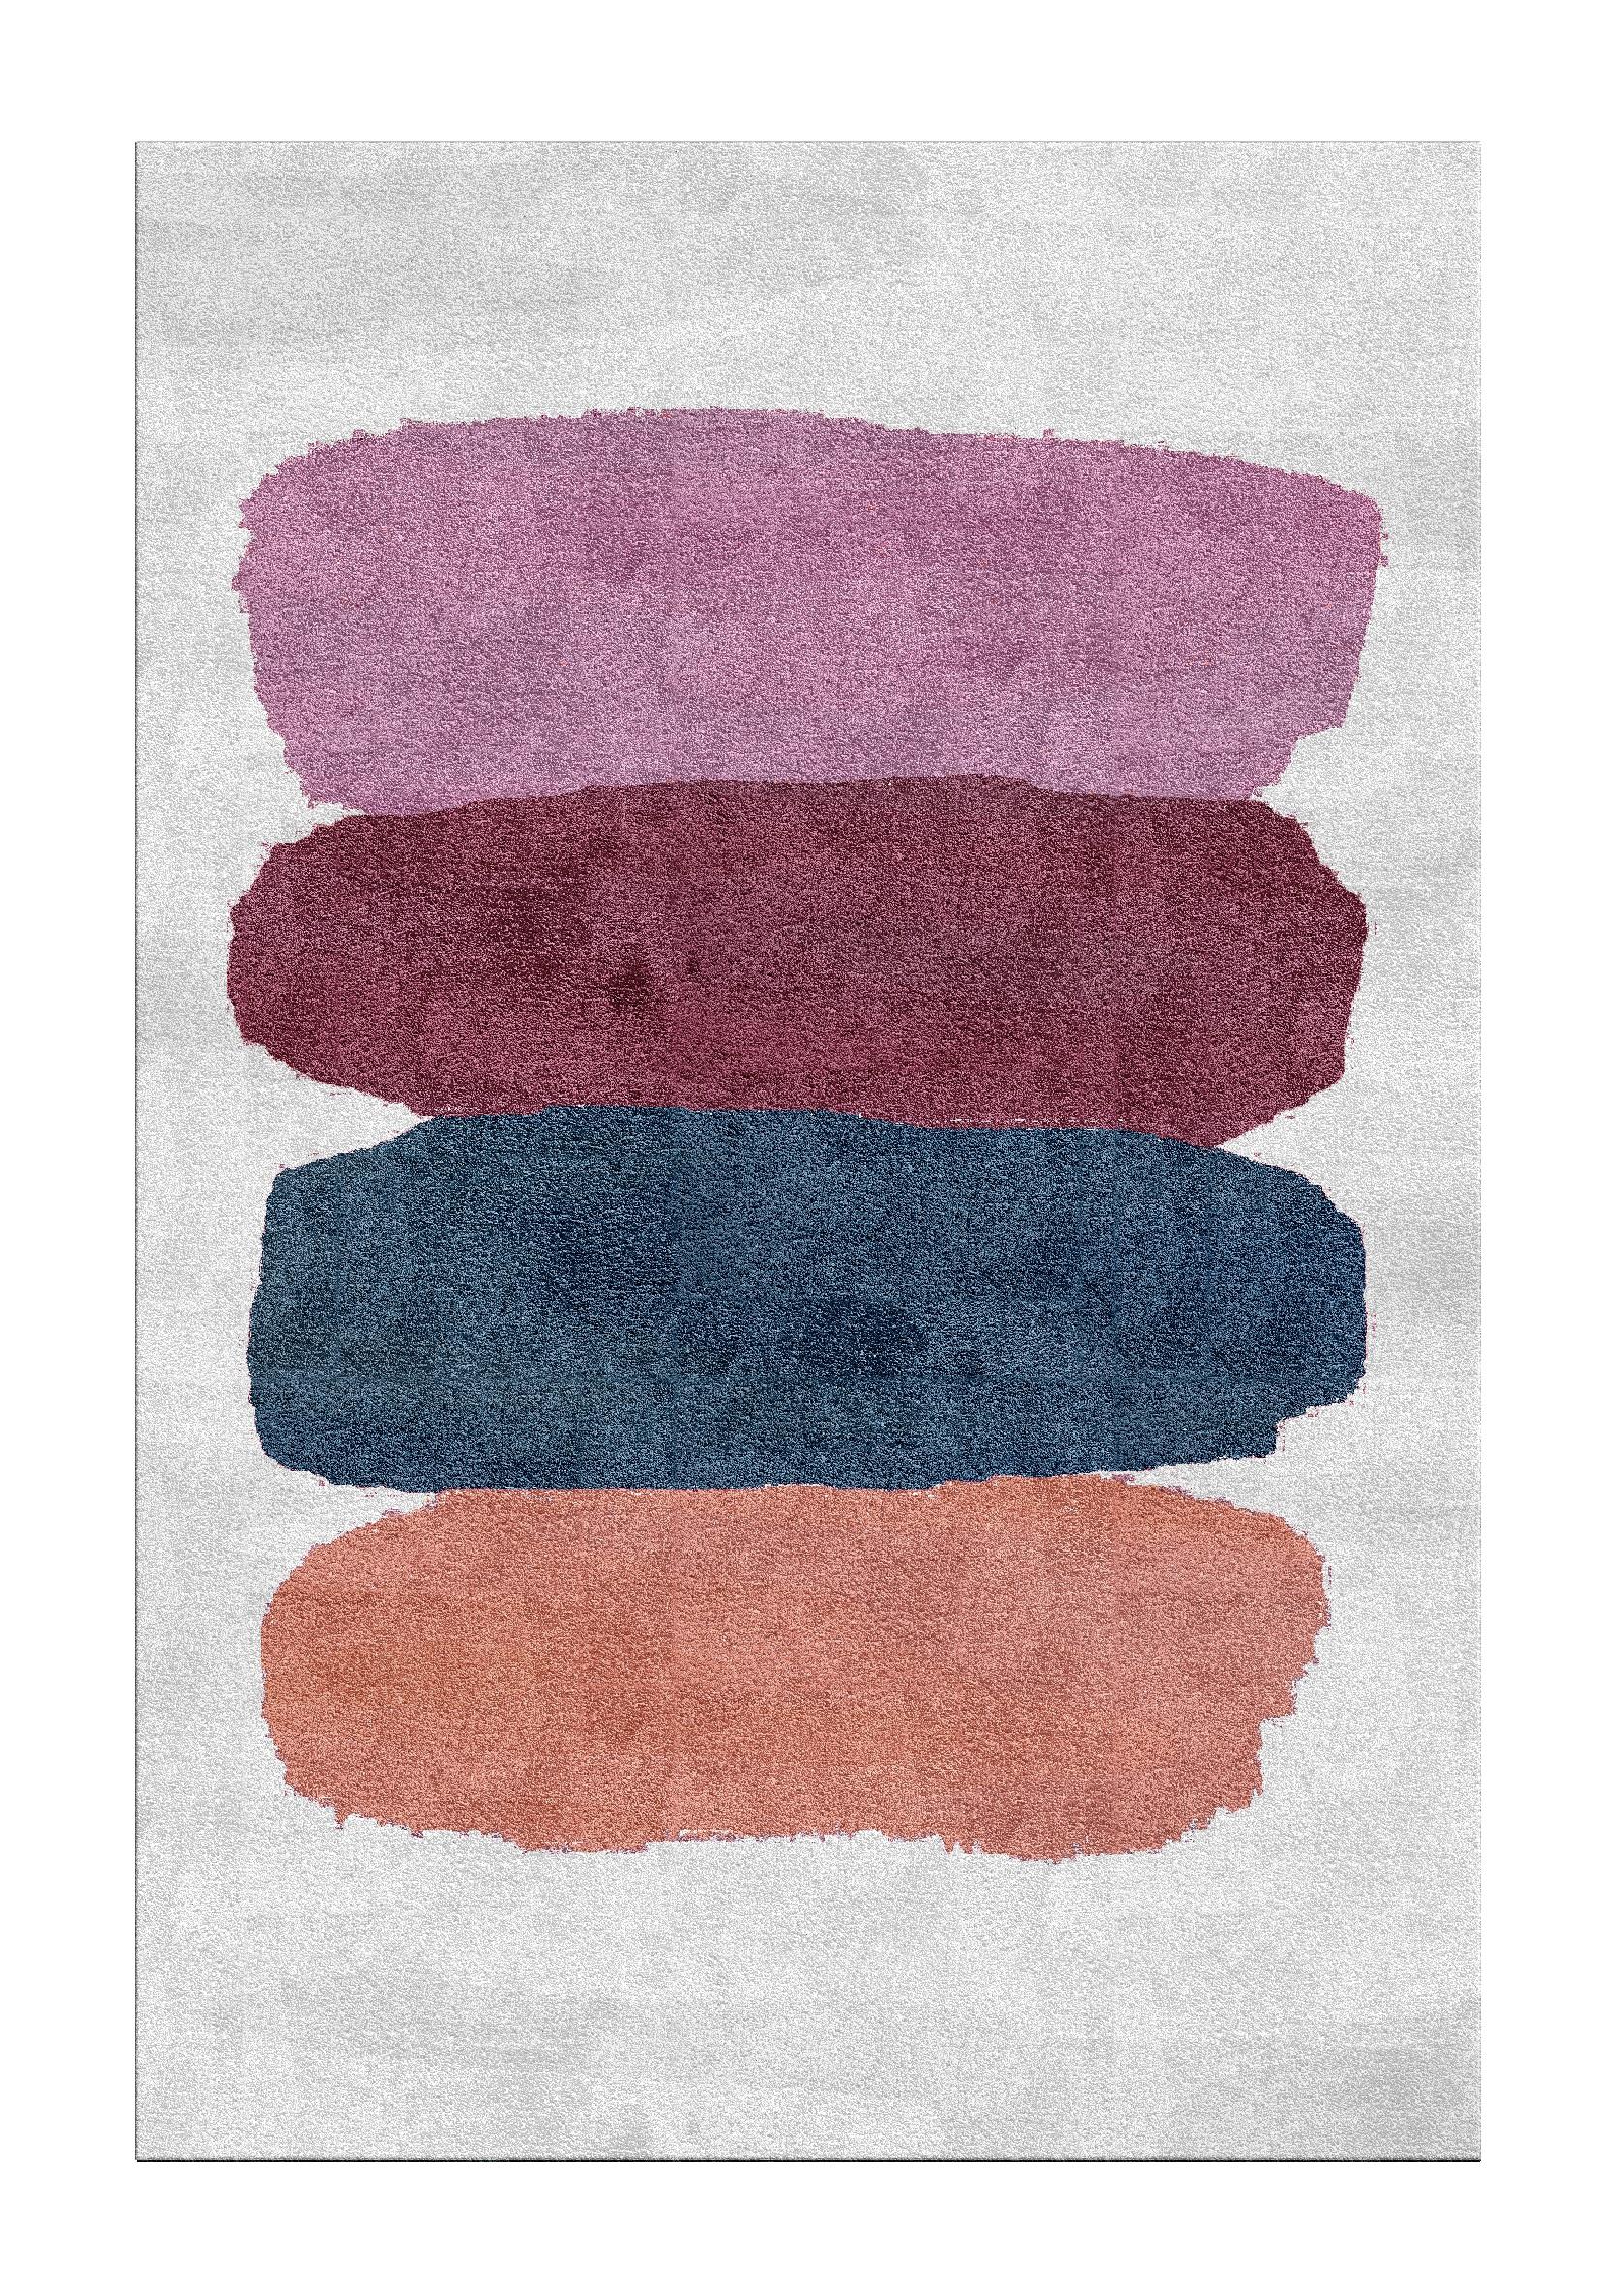 Palette rug III by Sarah Balivo
Dimensions: D 300 x W 200 cm
Materials: viscose, linen
Available in other colors.

The Palette collection drives its inspiration from the interior design world.
Each rug becomes a canvas redefining the interior